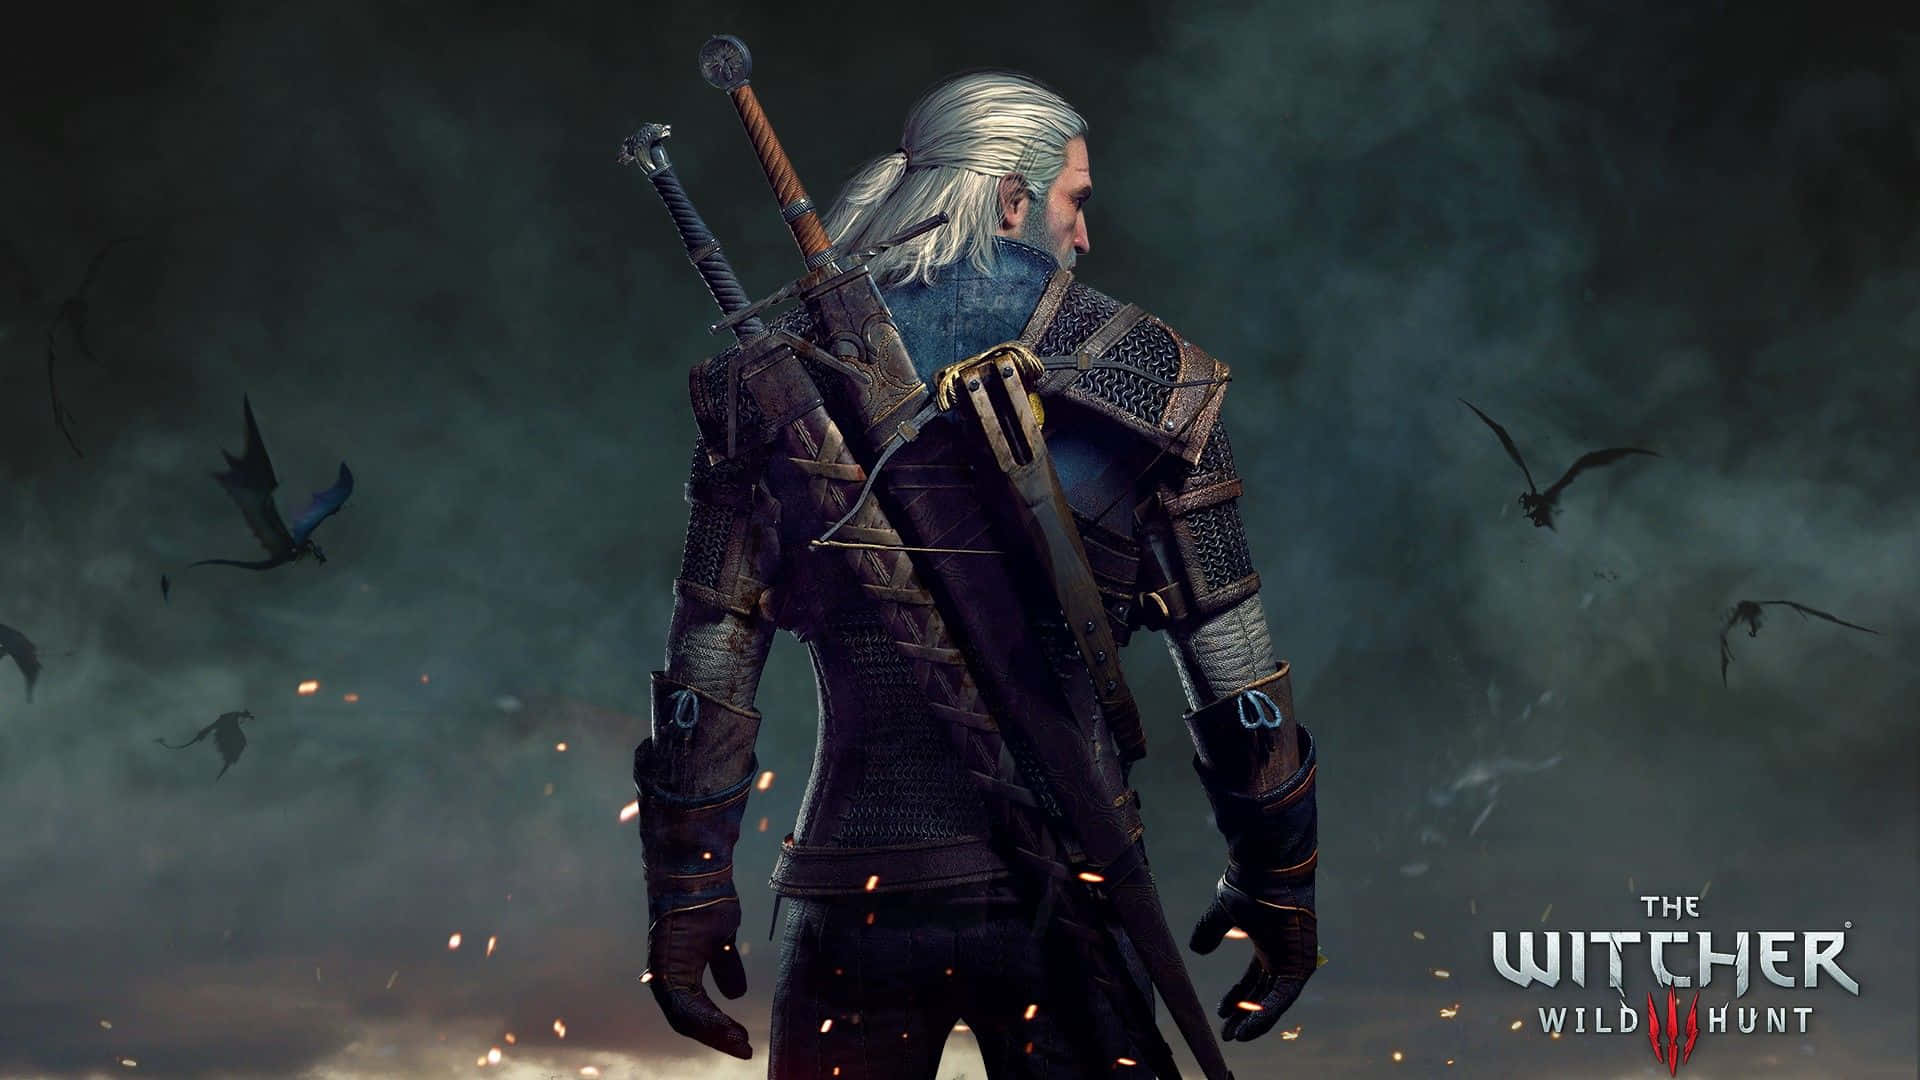 Join Geralt of Rivia on an epic journey in Witcher 3